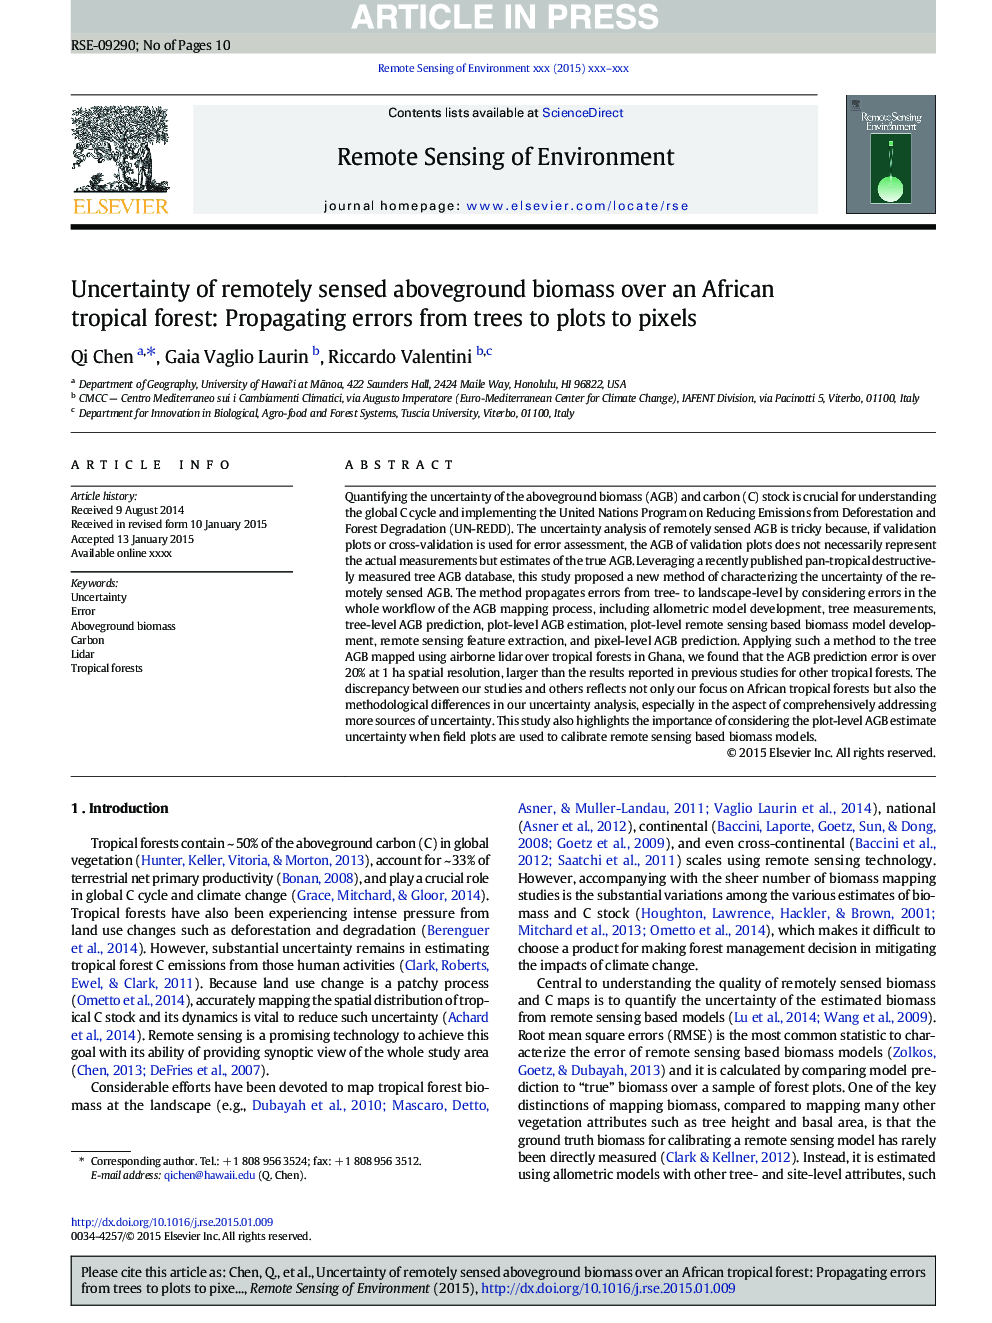 Uncertainty of remotely sensed aboveground biomass over an African tropical forest: Propagating errors from trees to plots to pixels